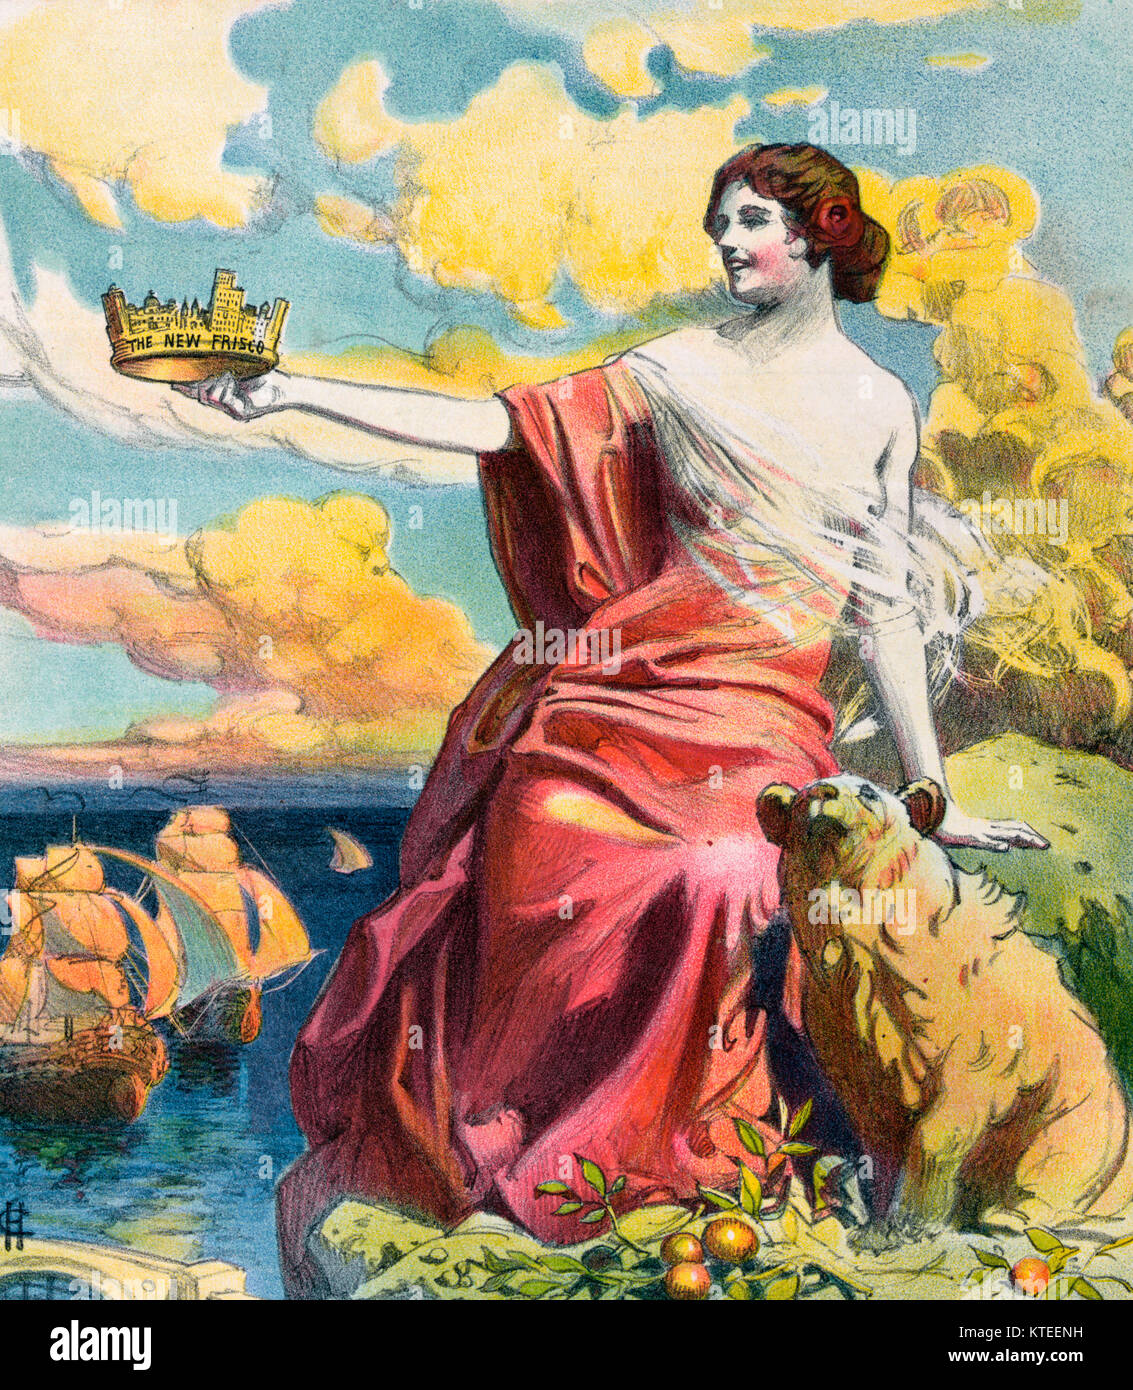 Illustration shows a female figure holding out a crown labeled 'The New Frisco', fashioned after a city skyline; a bear sits on the ground next to her and, in the background, are 16th or 17th century sailing ships. 1906 Political Cartoon Stock Photo